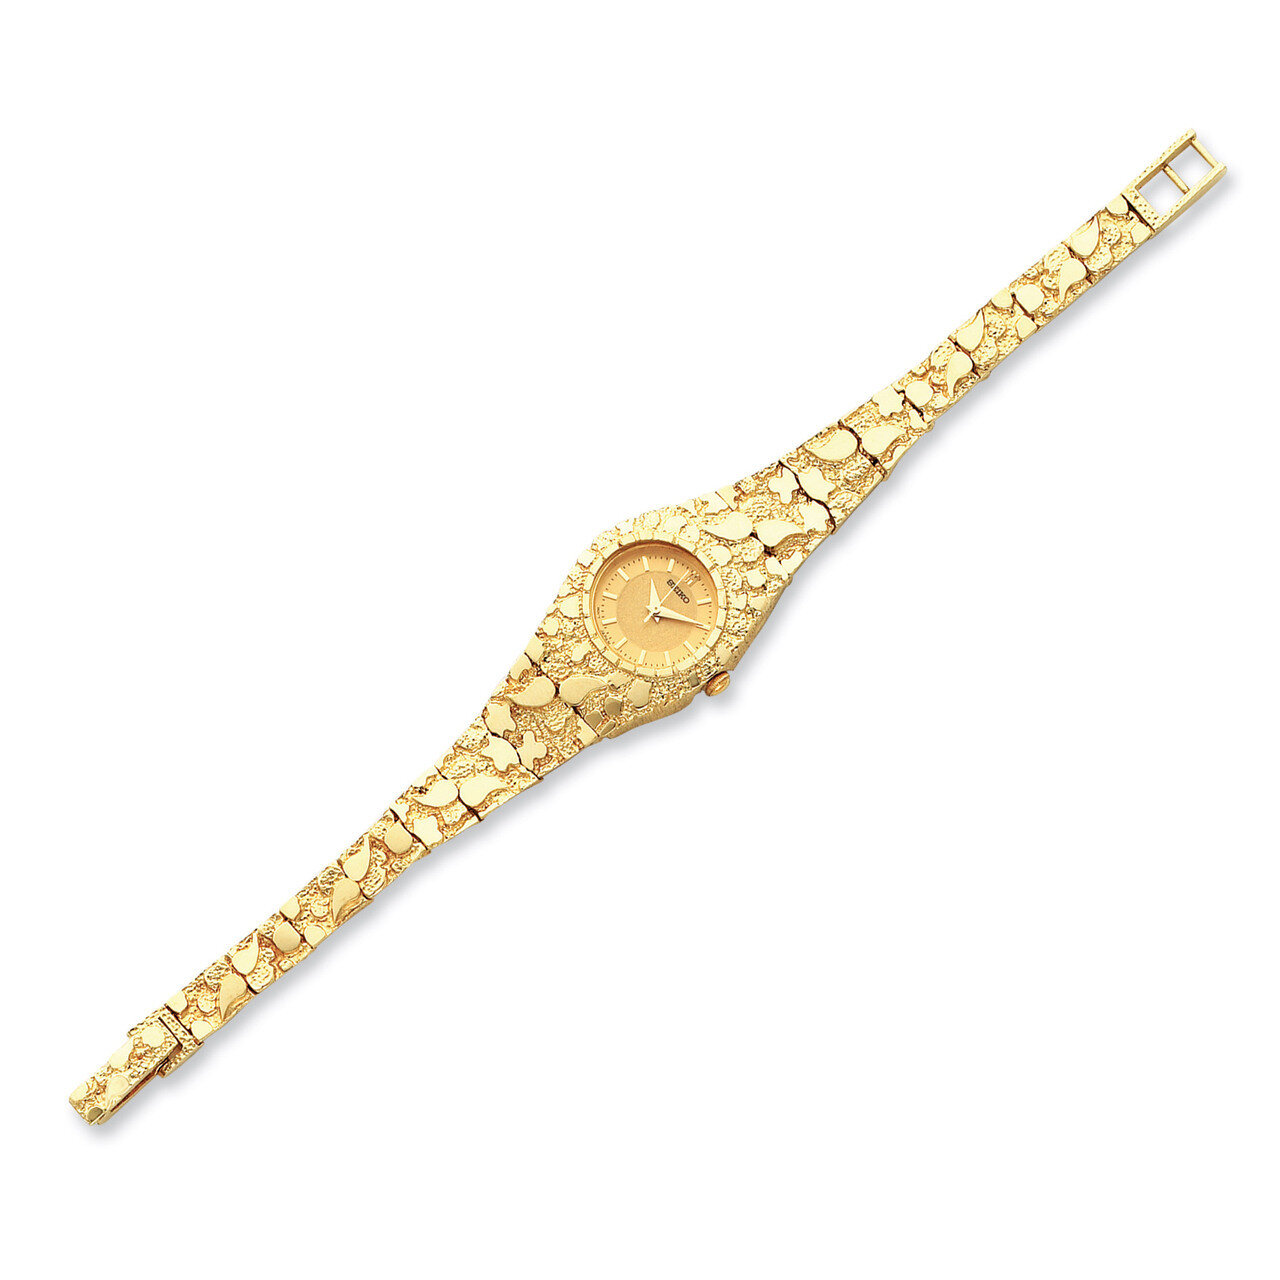 Ladies Circular Champagne 22mm Dial Solid Nugget Watch 14k Gold NB260Y-7